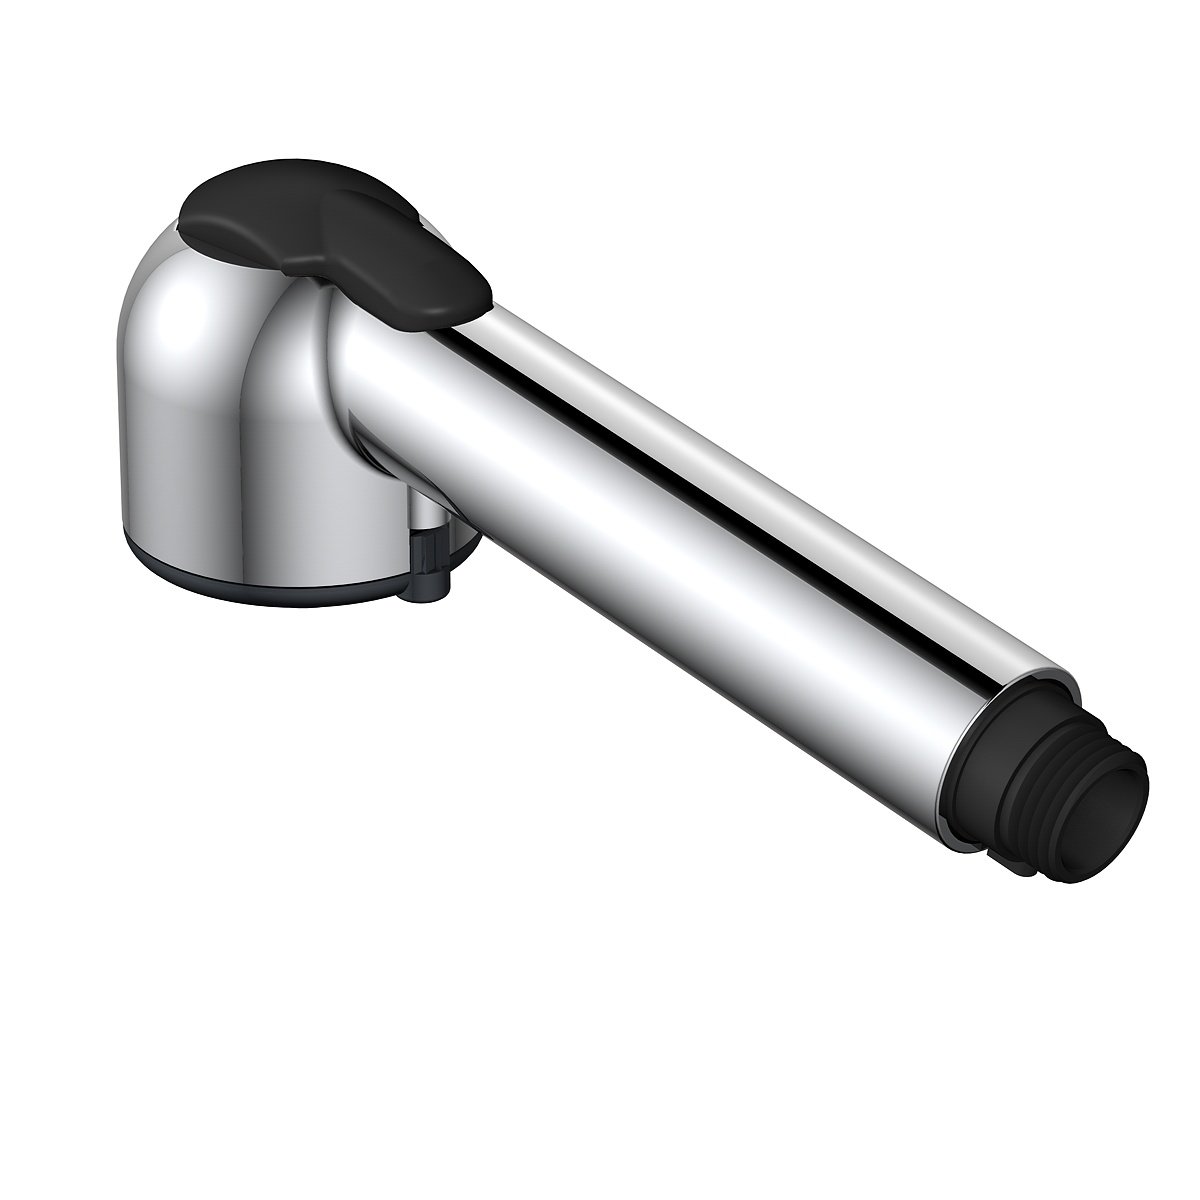 DANZE DA523036N Spray Head for 1H Pull-Out Kitchen Faucet 2.2gpm Chrome, Brushed Nickel